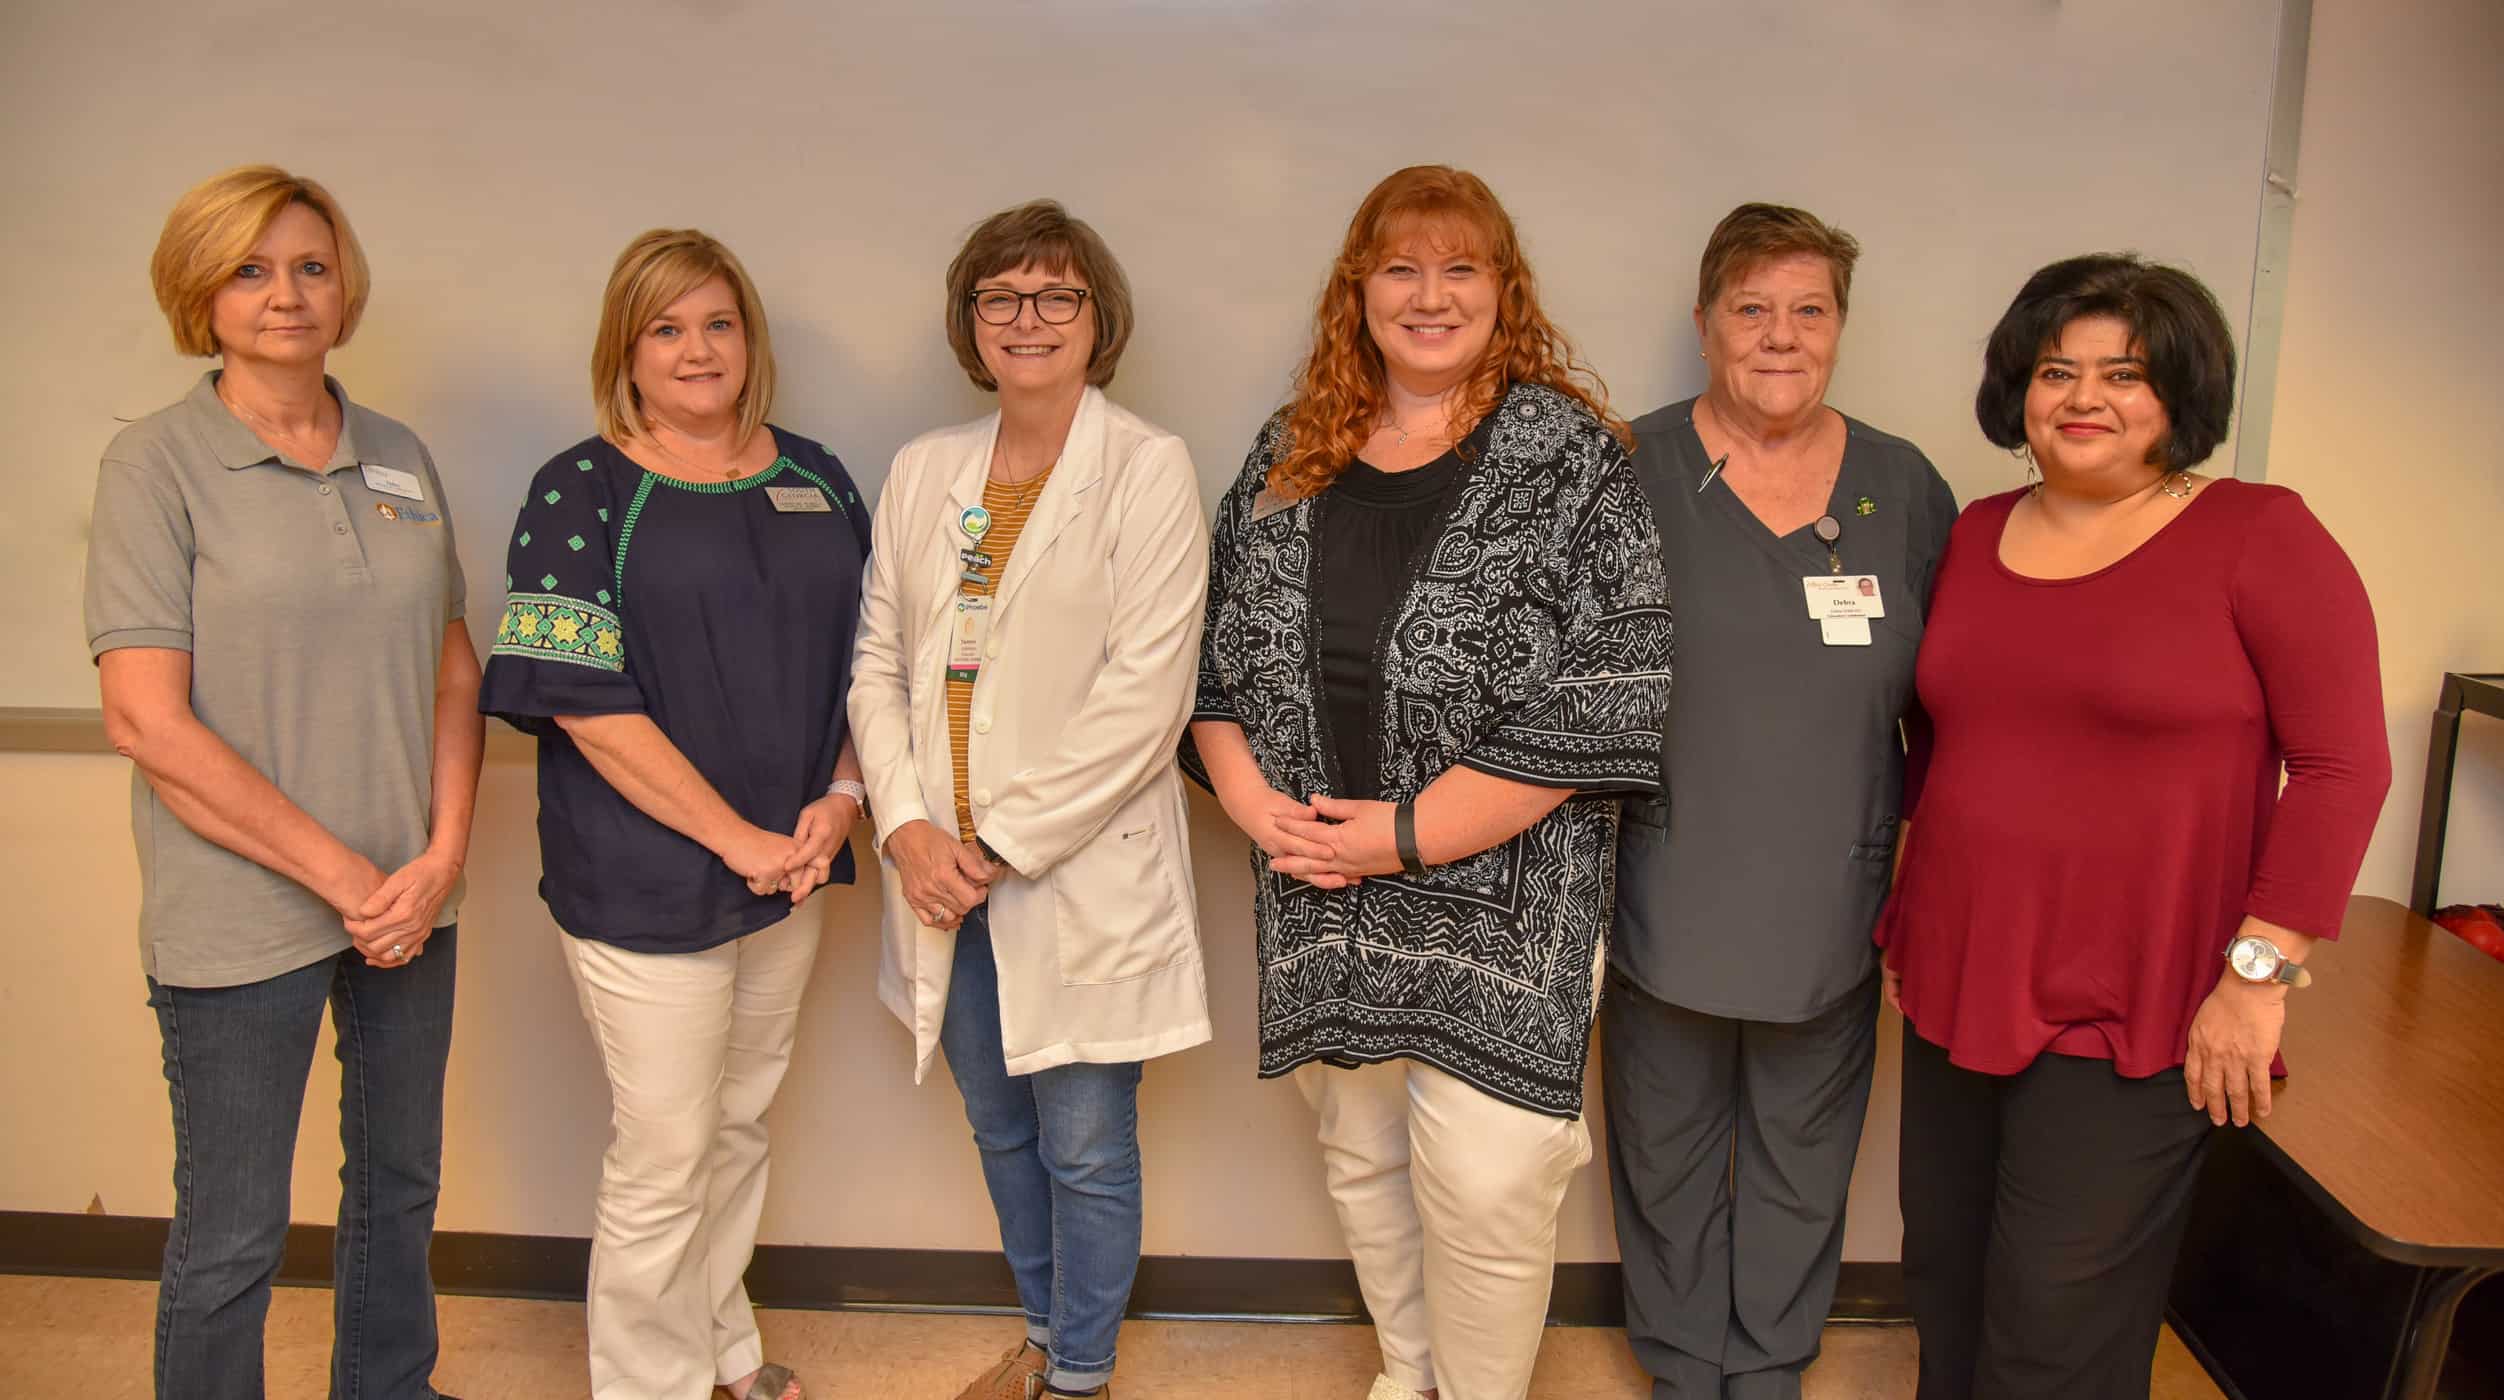 SGTC's practical nursing advisory committee members, (left to right) Debra Mims, Christine Rundle, Tammi Johnston, Jennifer Childs, Debra Webb and Sandhya Muljibhai, stand together following their semi-annual meeting.